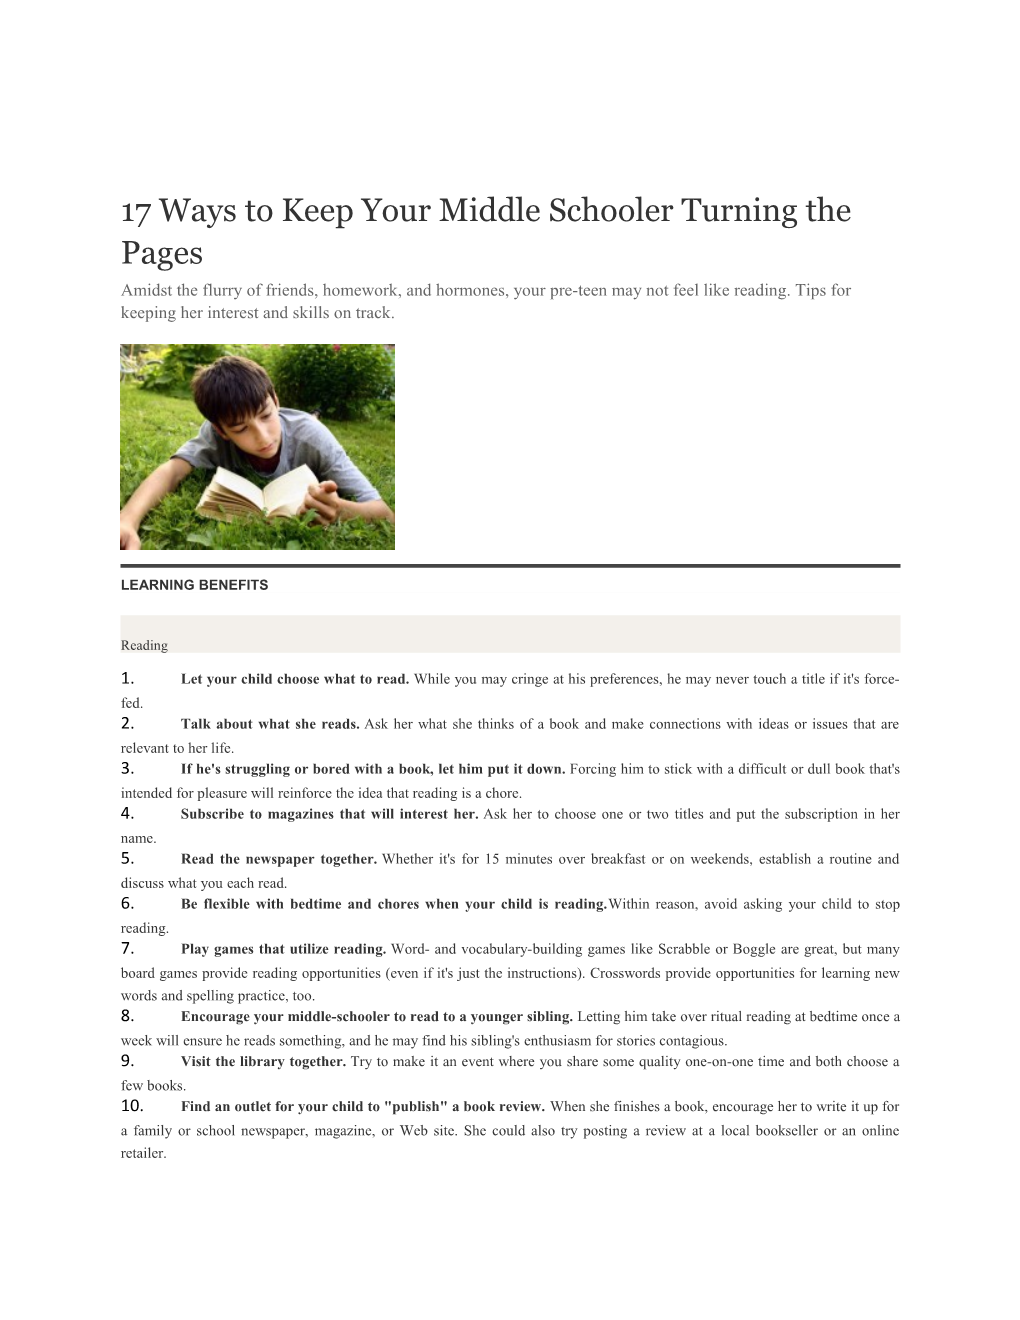 17 Ways to Keep Your Middle Schooler Turning the Pages